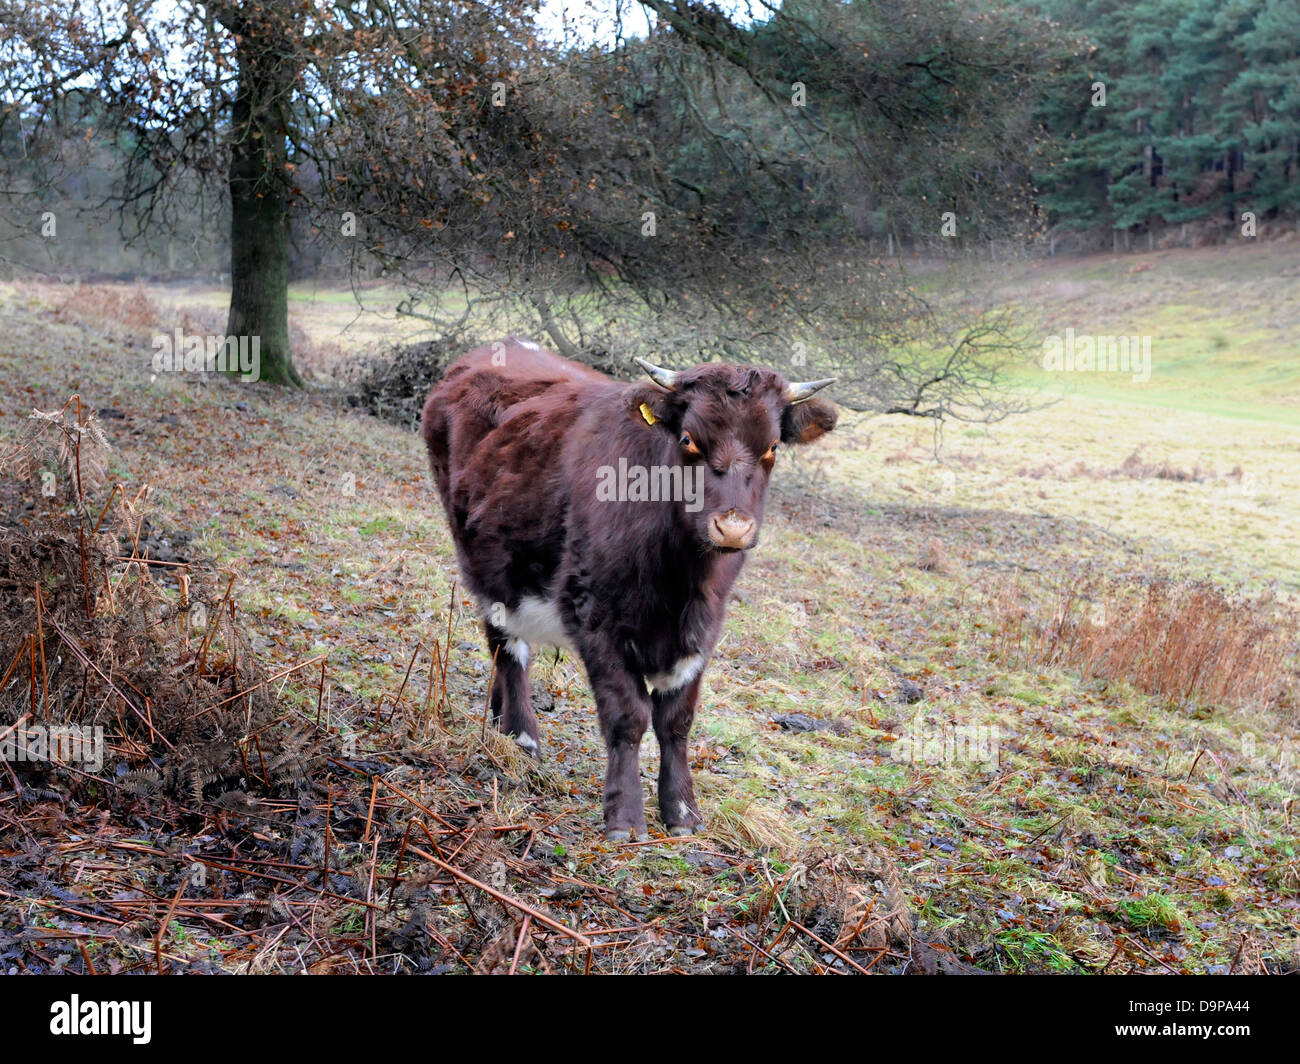 A young docile brown bull alone in a field. Stock Photo